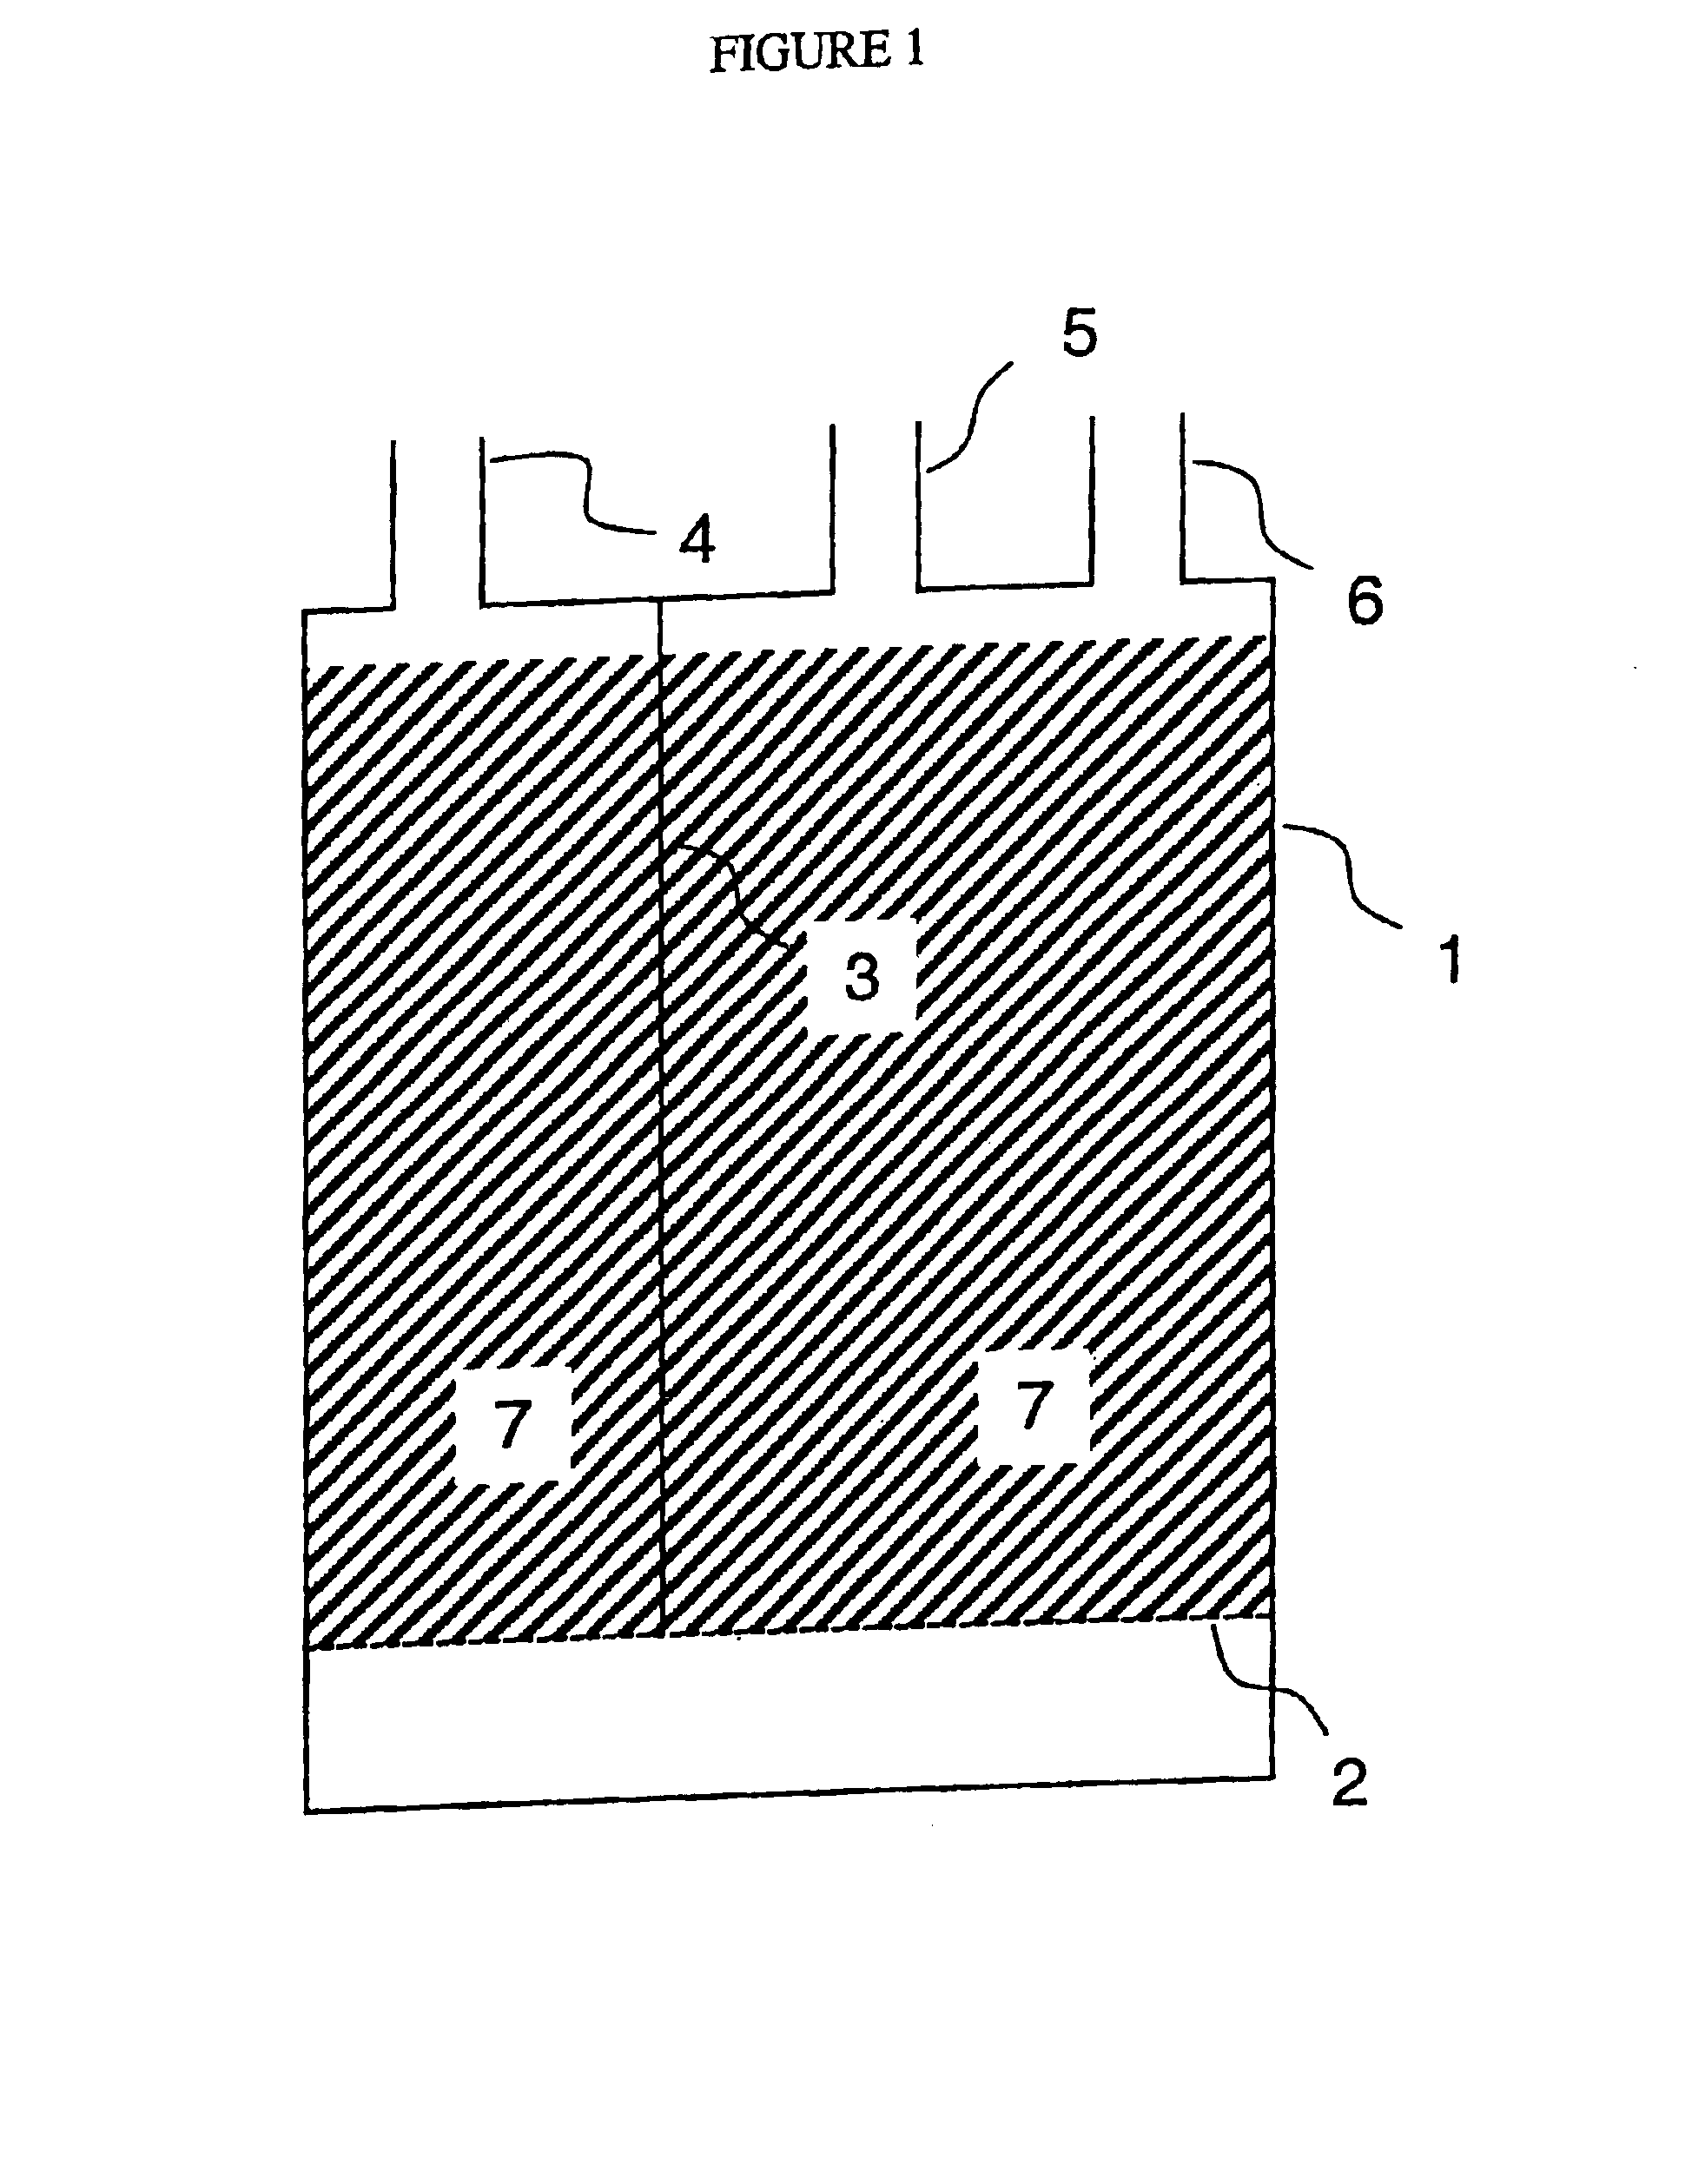 Method for reducing emissions from evaporative emissions control systems